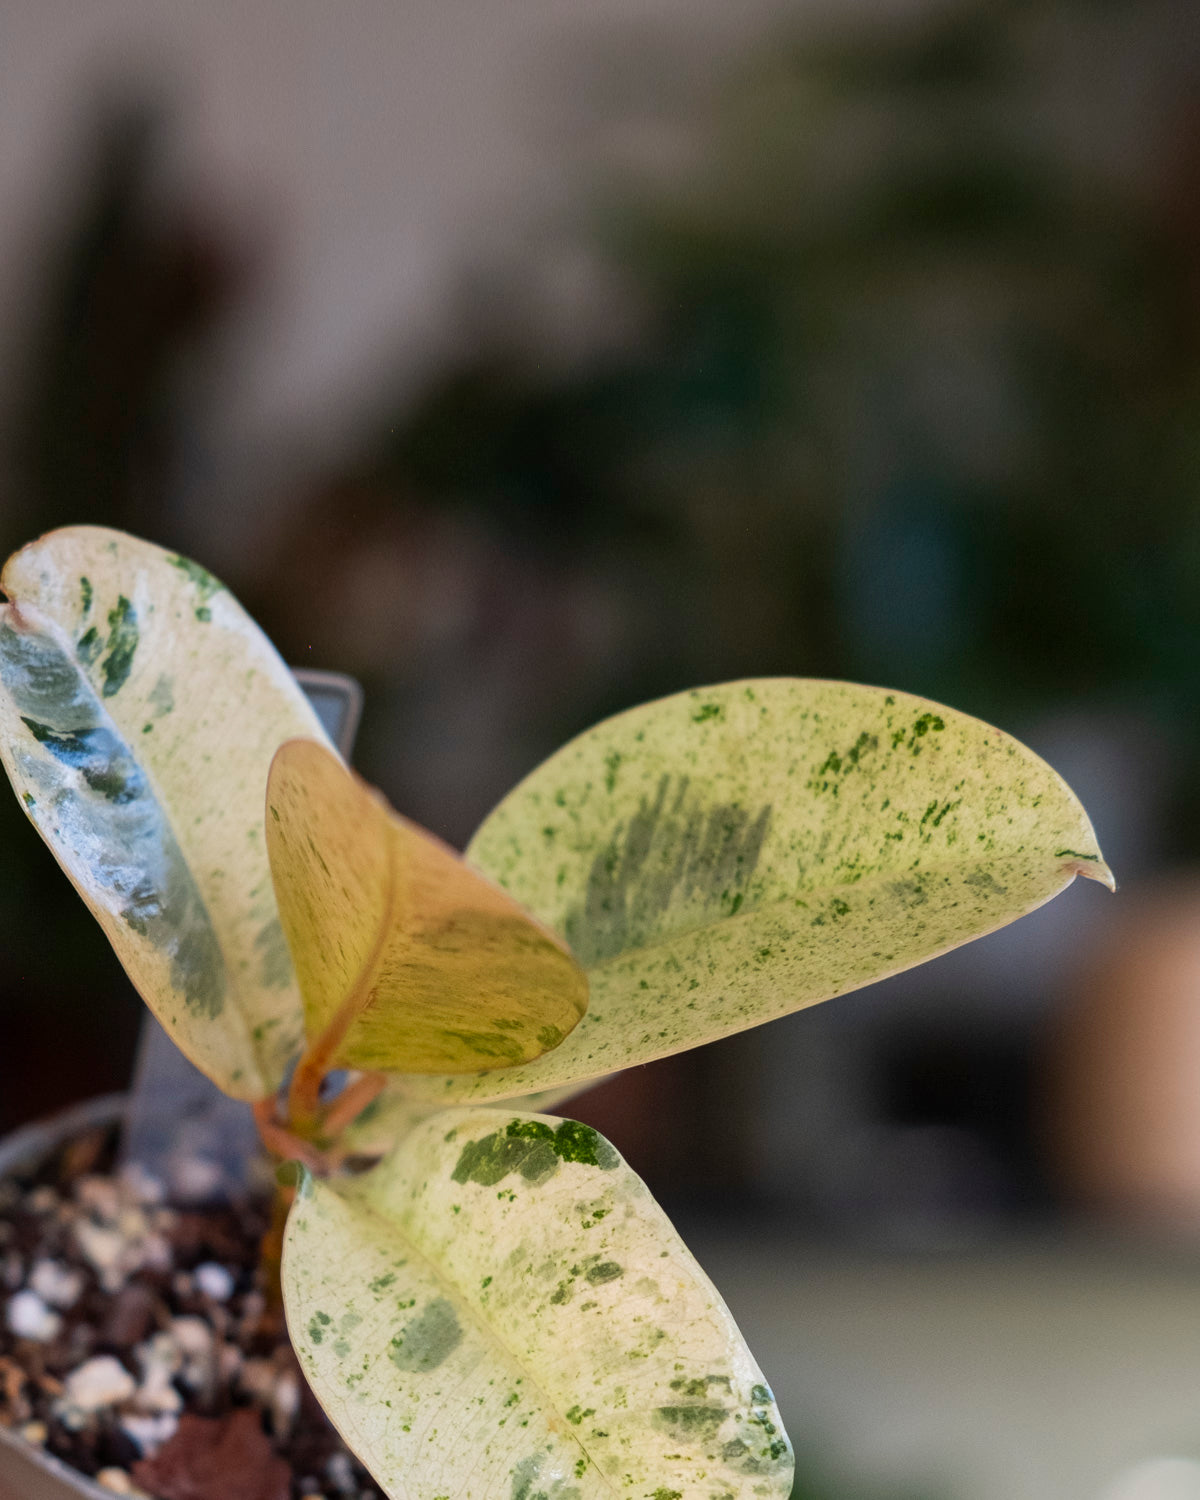 Ficus shivereana or moonshine baby plant, cream and dark green variegation